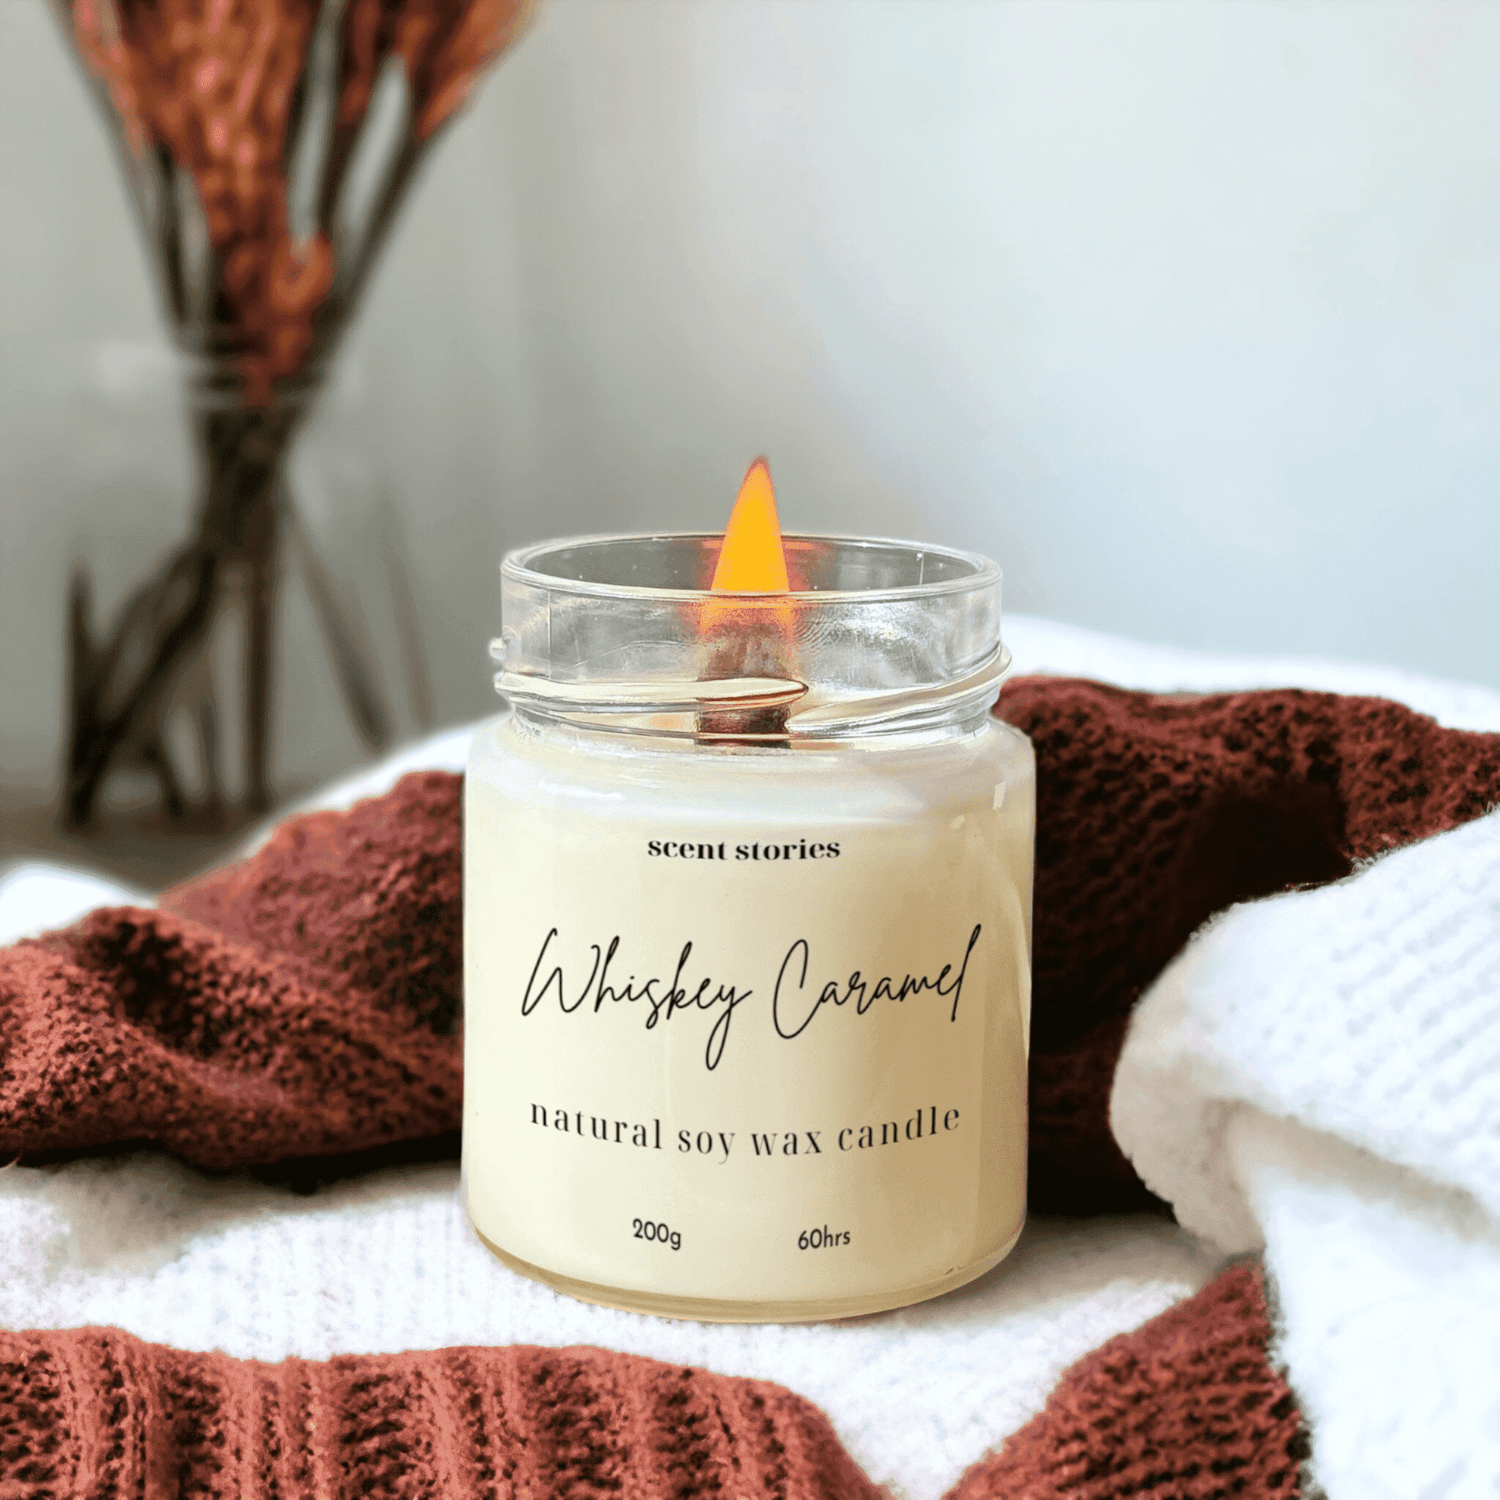 Whiskey Caramel - Scent Stories